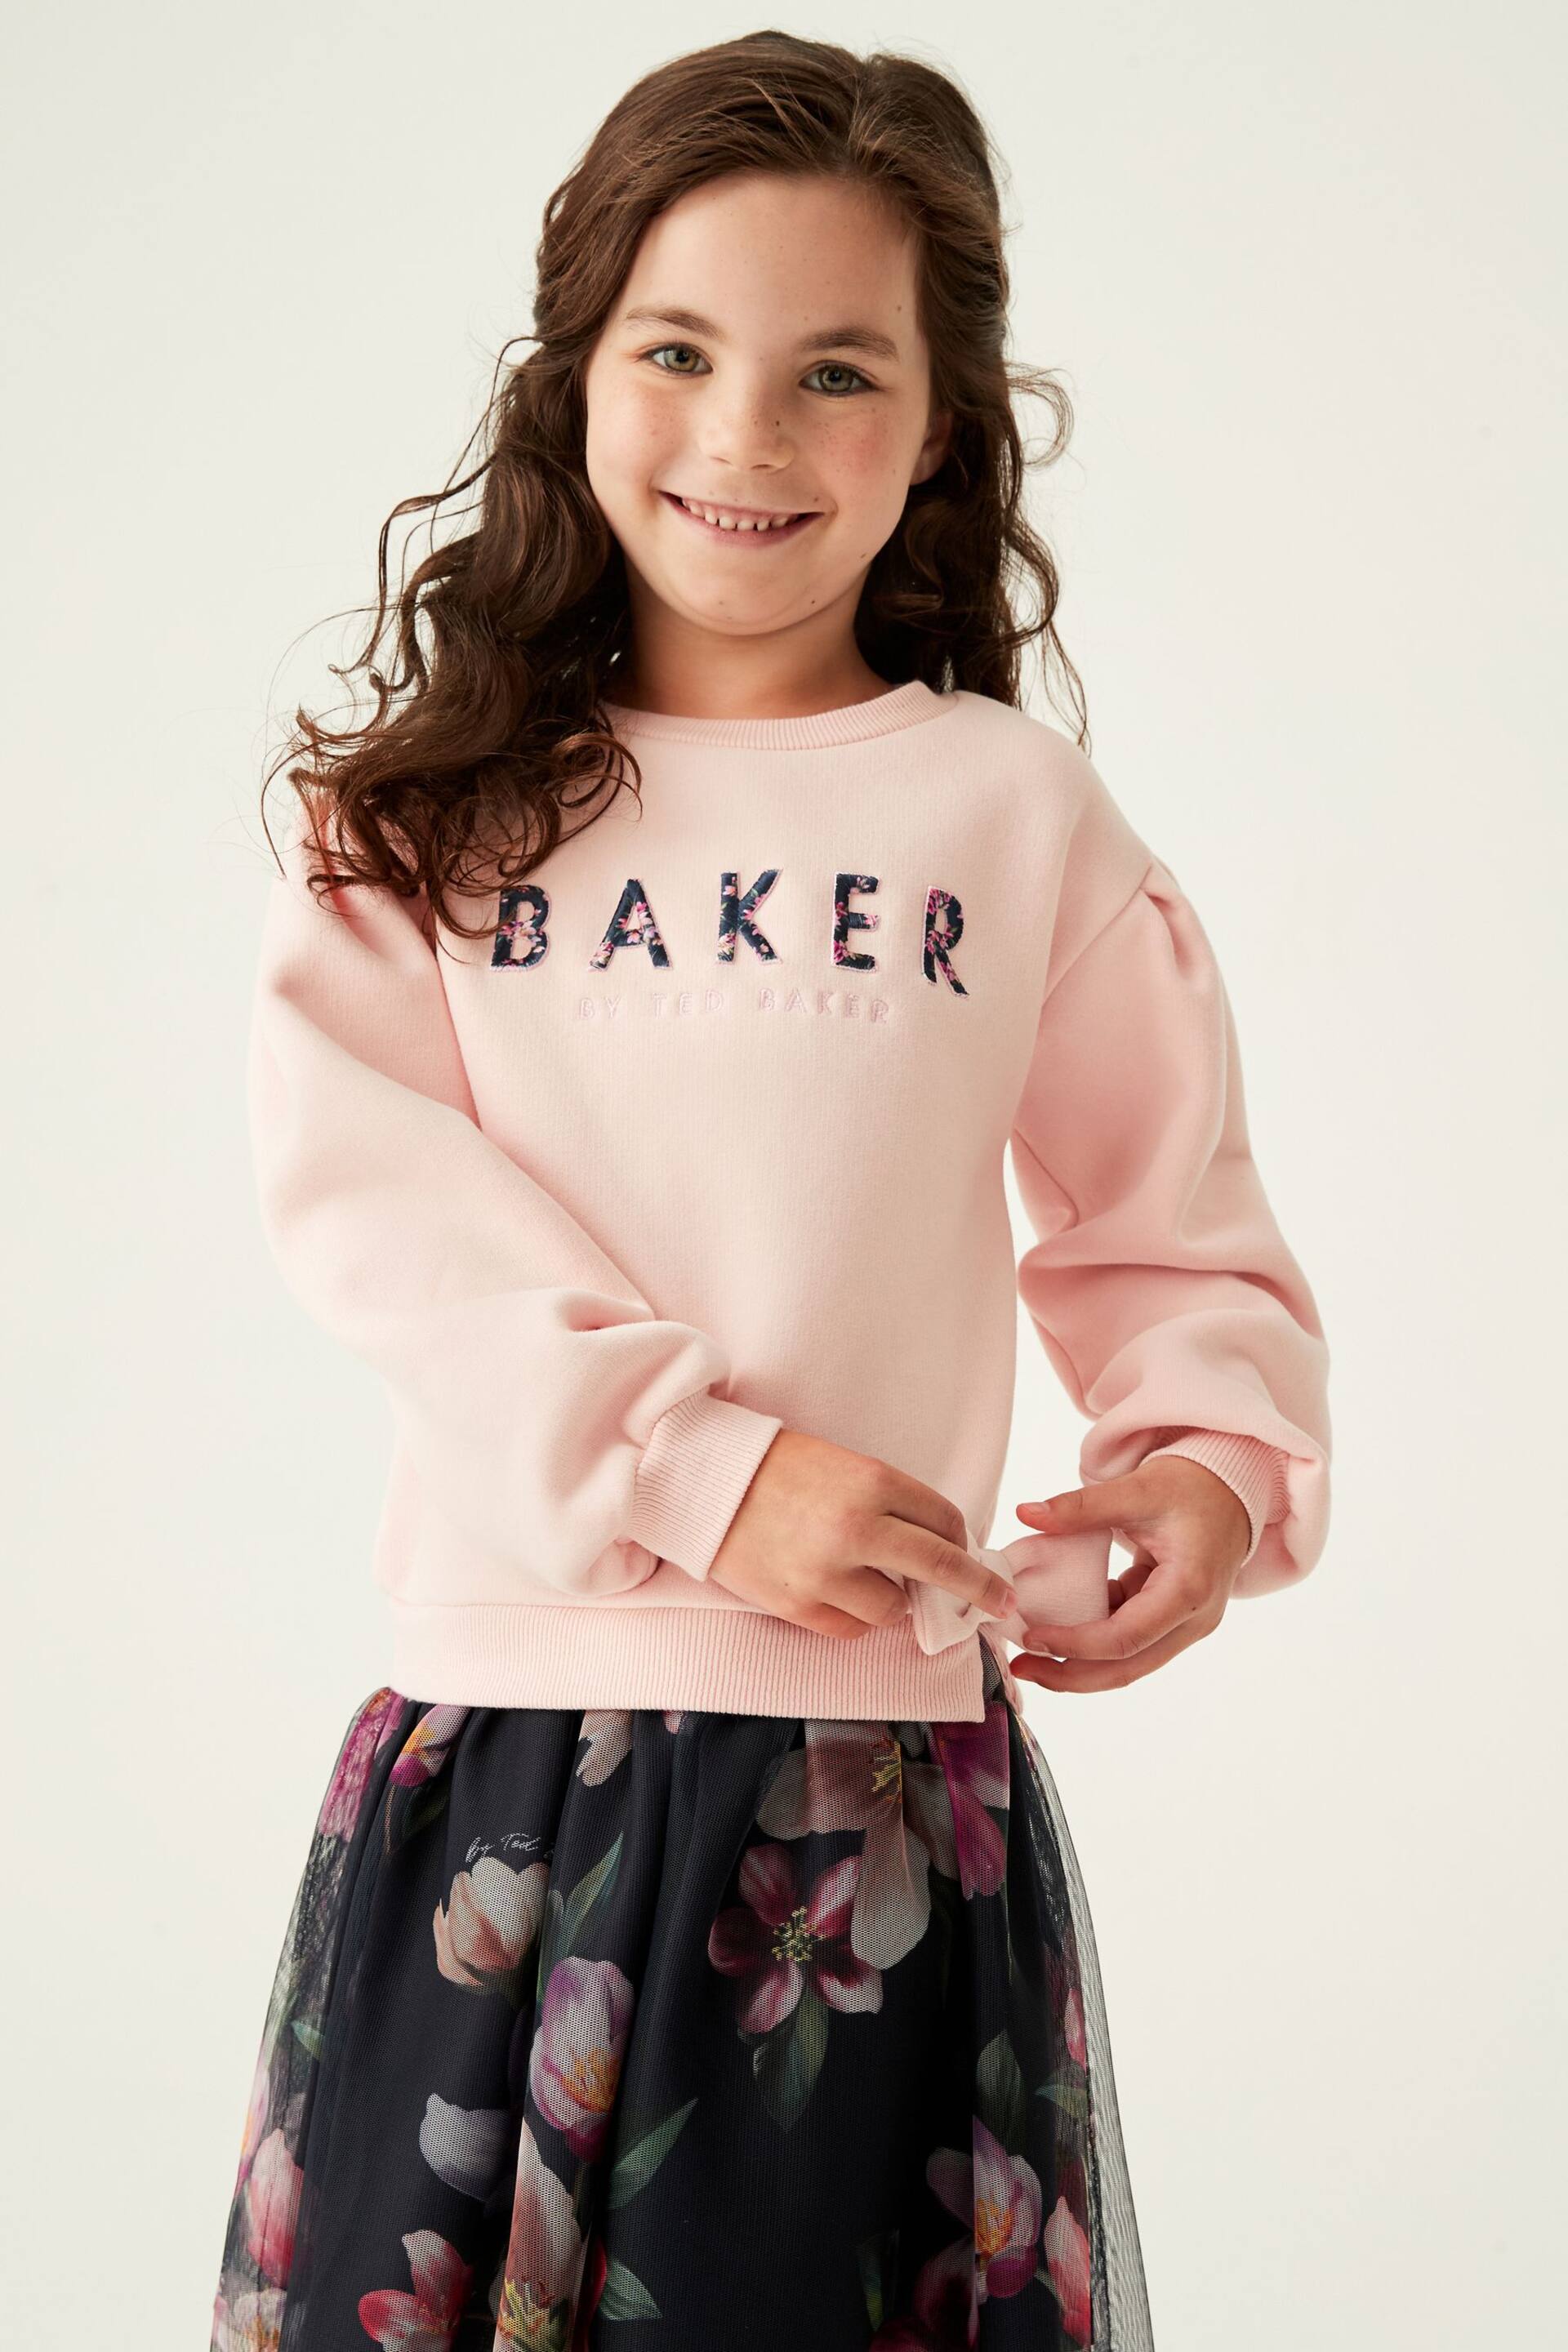 Baker by Ted Baker 2-in-1 Sweat Dress - Image 3 of 10